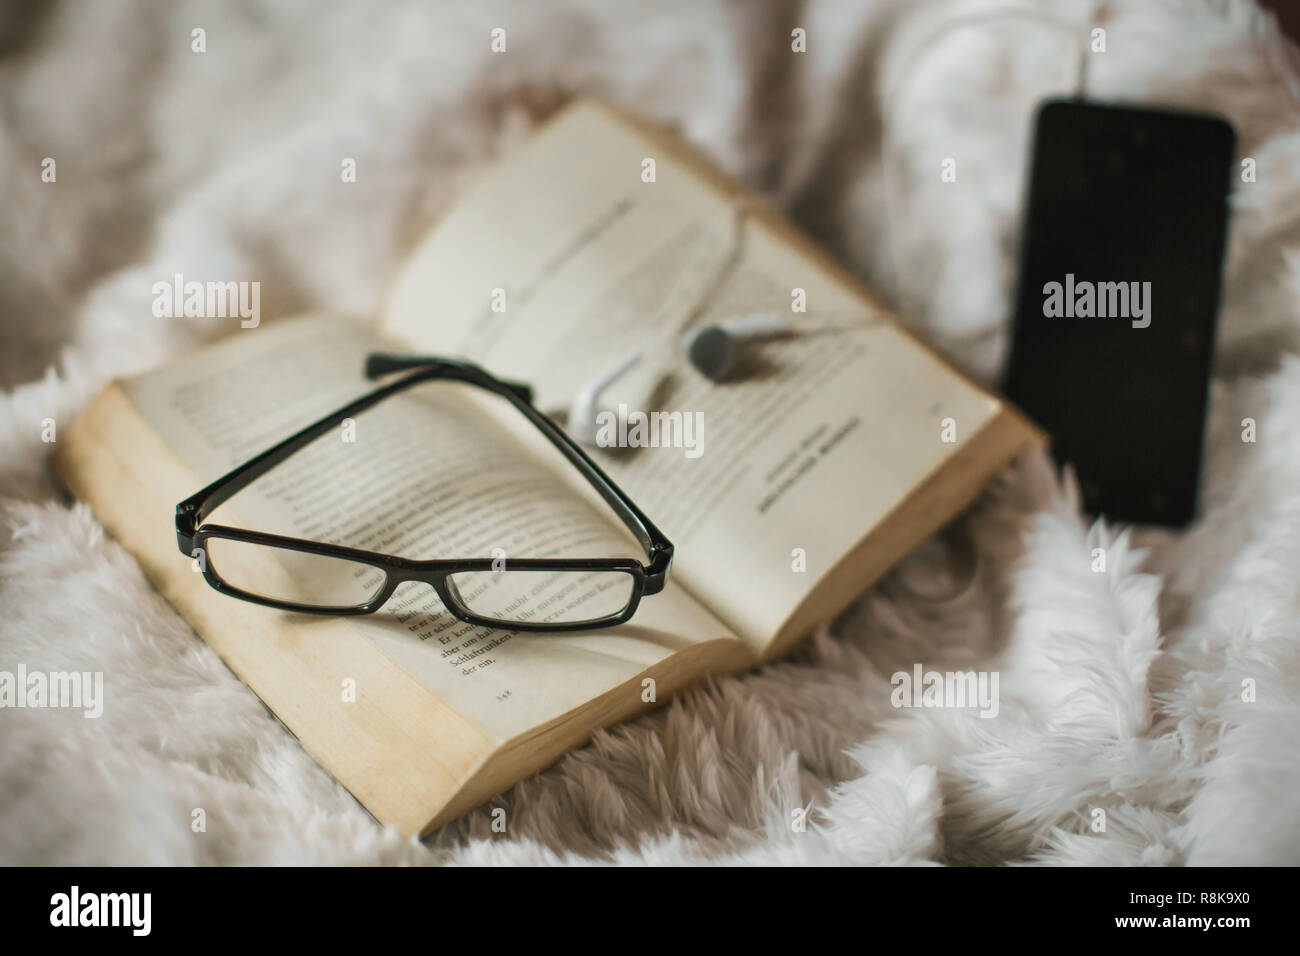 an old book on blankie blanket with horn-rimmed eye glasses and a mobile phone with headset, in a peaceful scene Stock Photo